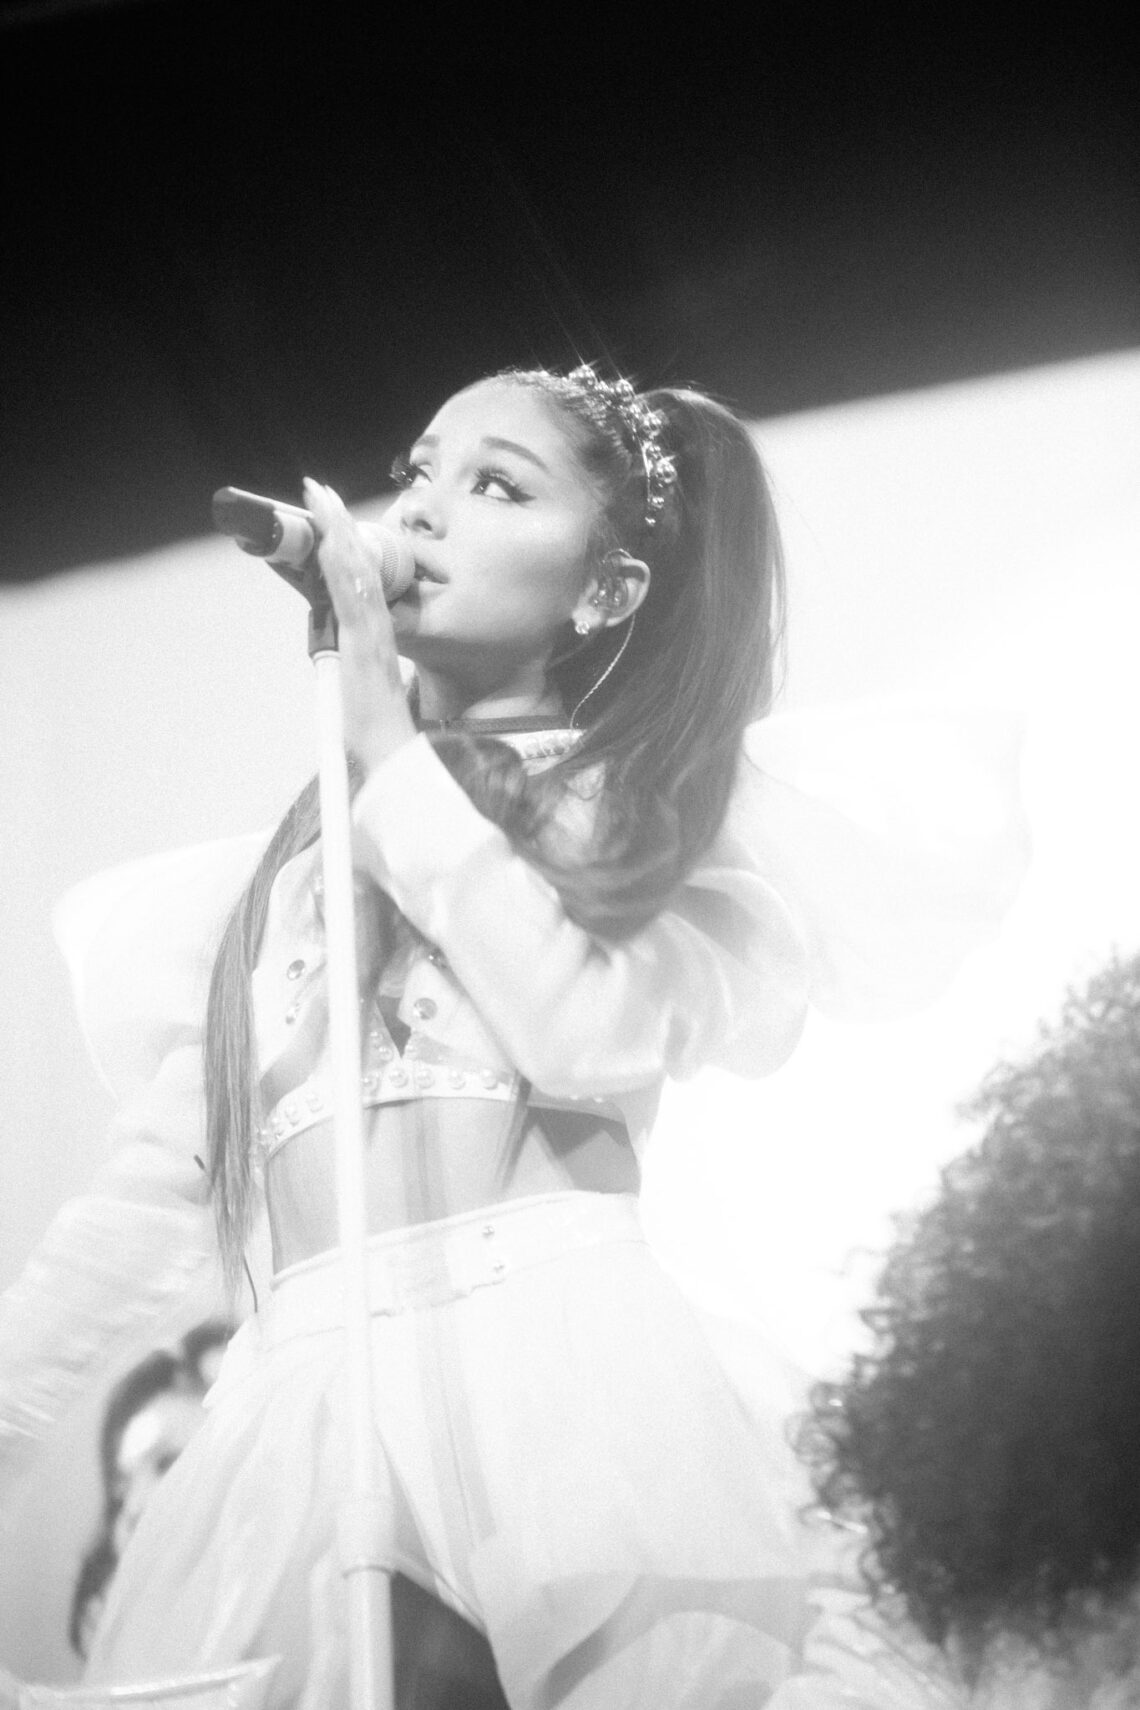 Ariana Grande signing during a performance